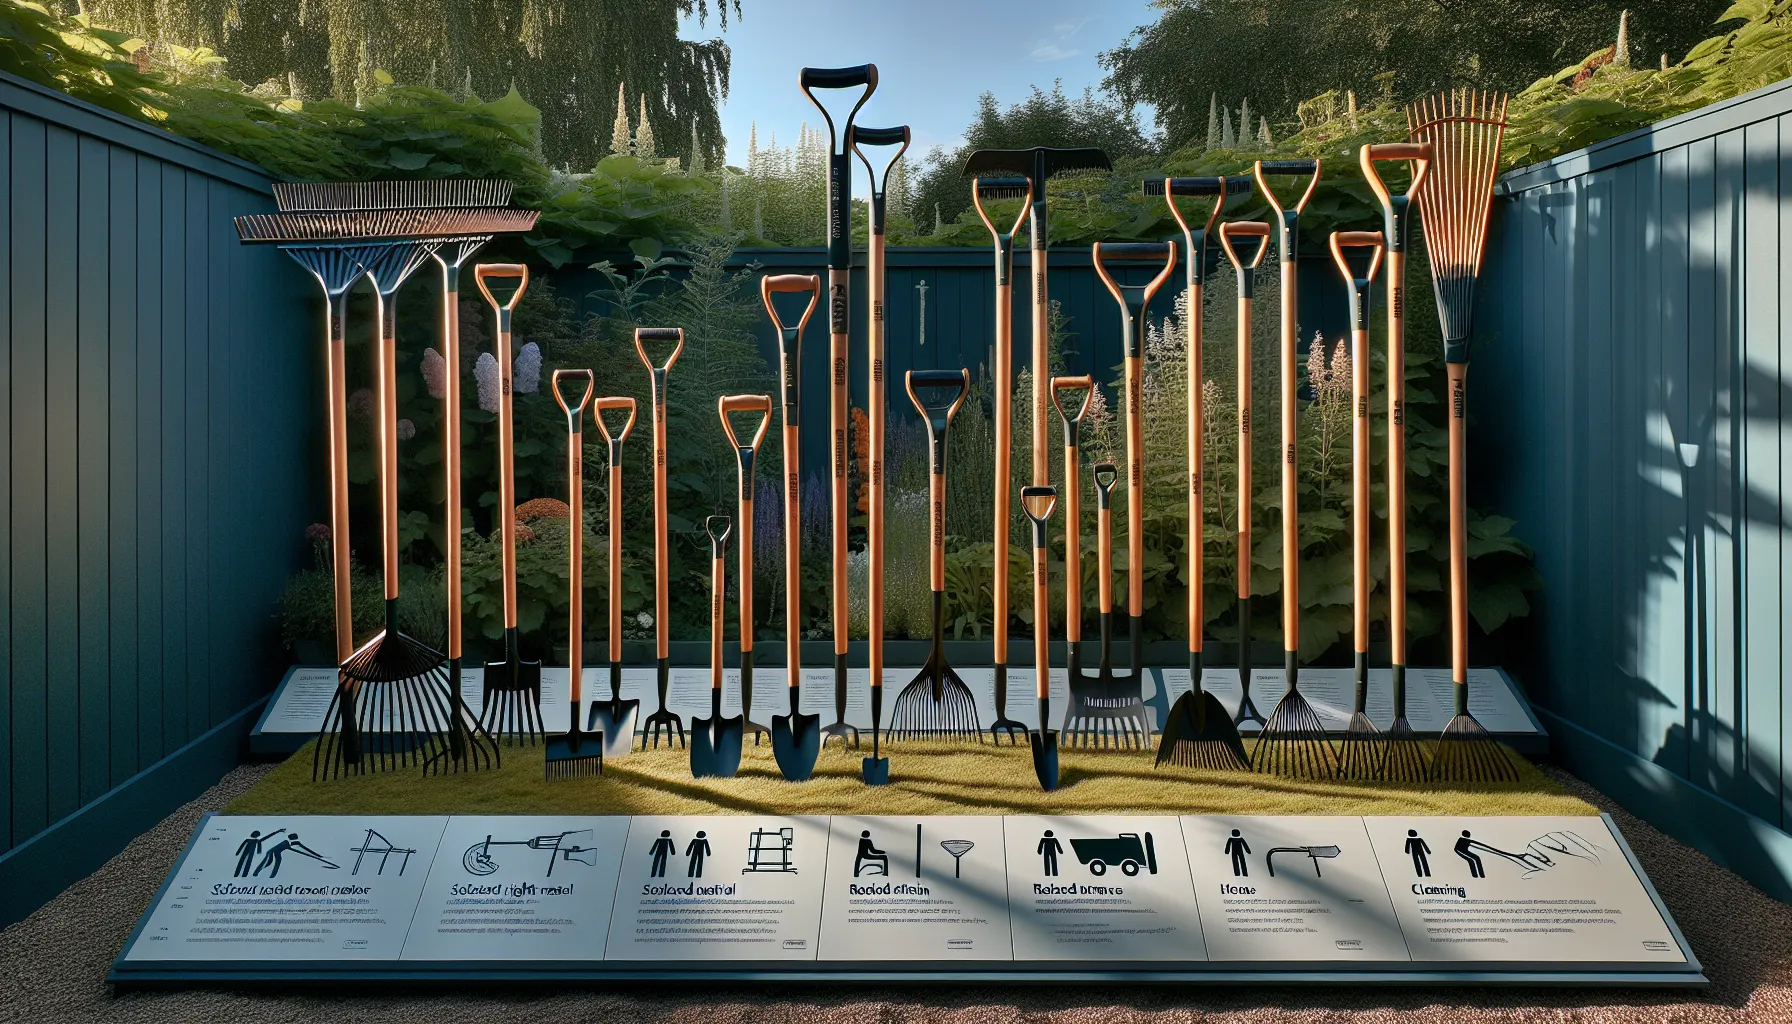 A collection of garden tools with long handles, including rakes, shovels, and hoes, displayed against a garden backdrop with instructional signs.